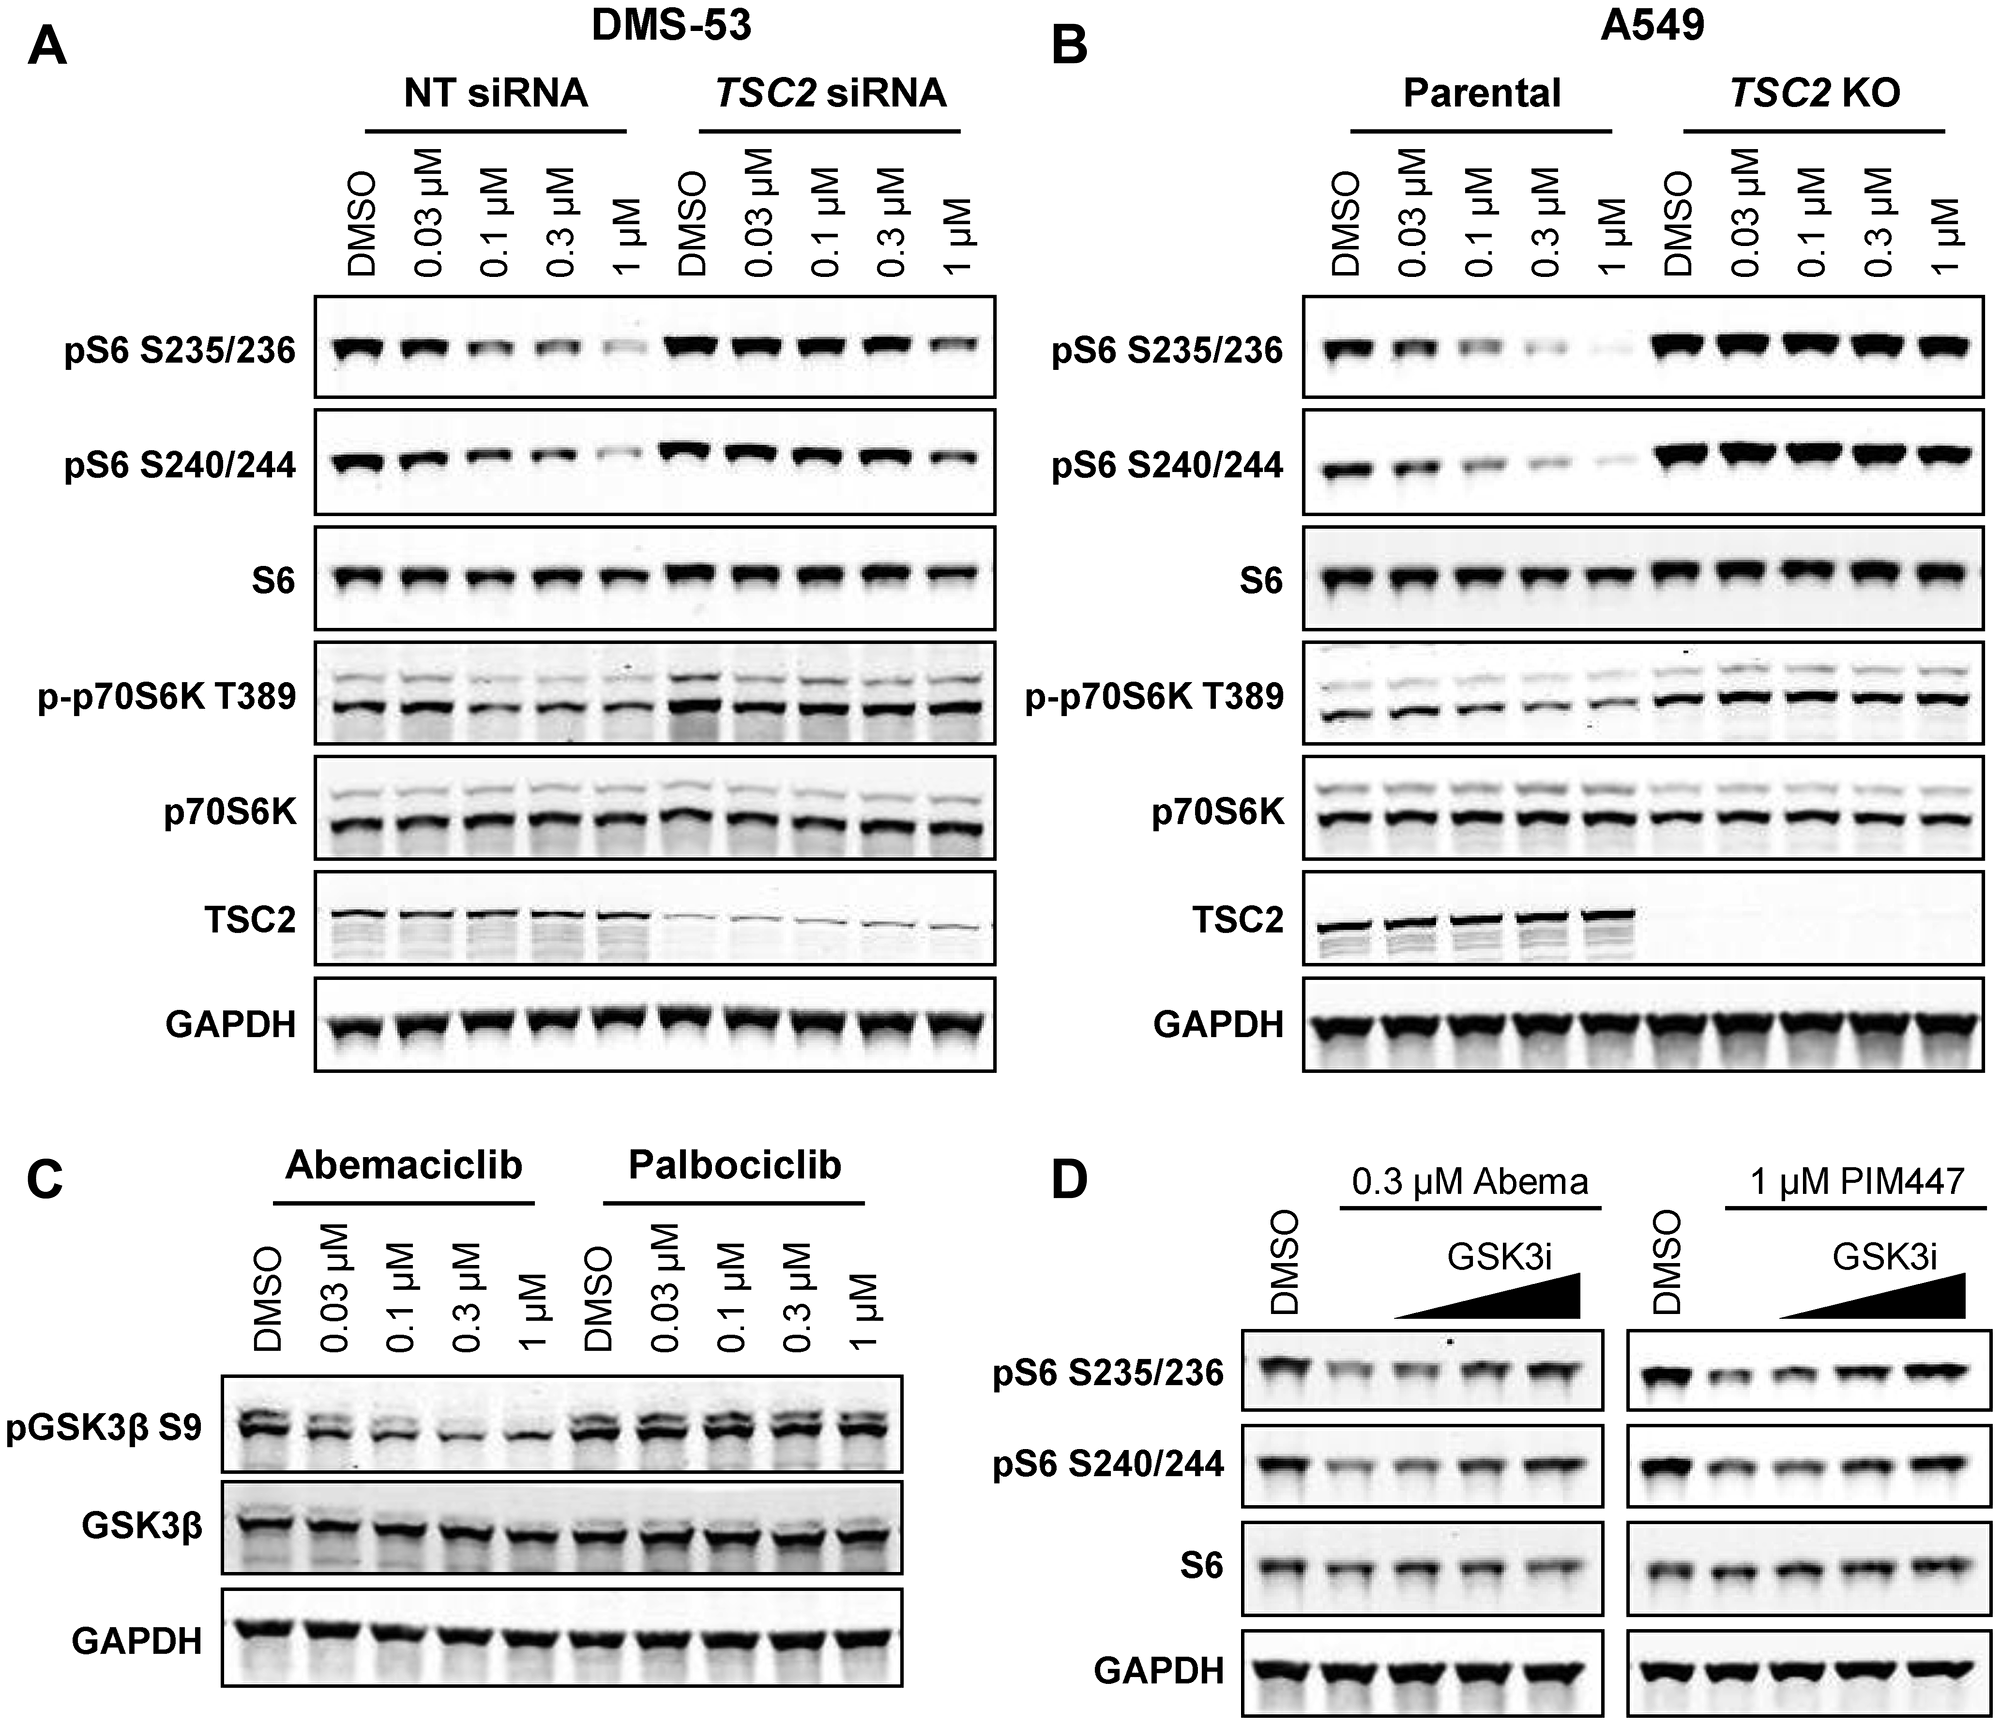 Inhibition of mTOR signaling by abemaciclib requires TSC2 and GSK3β.